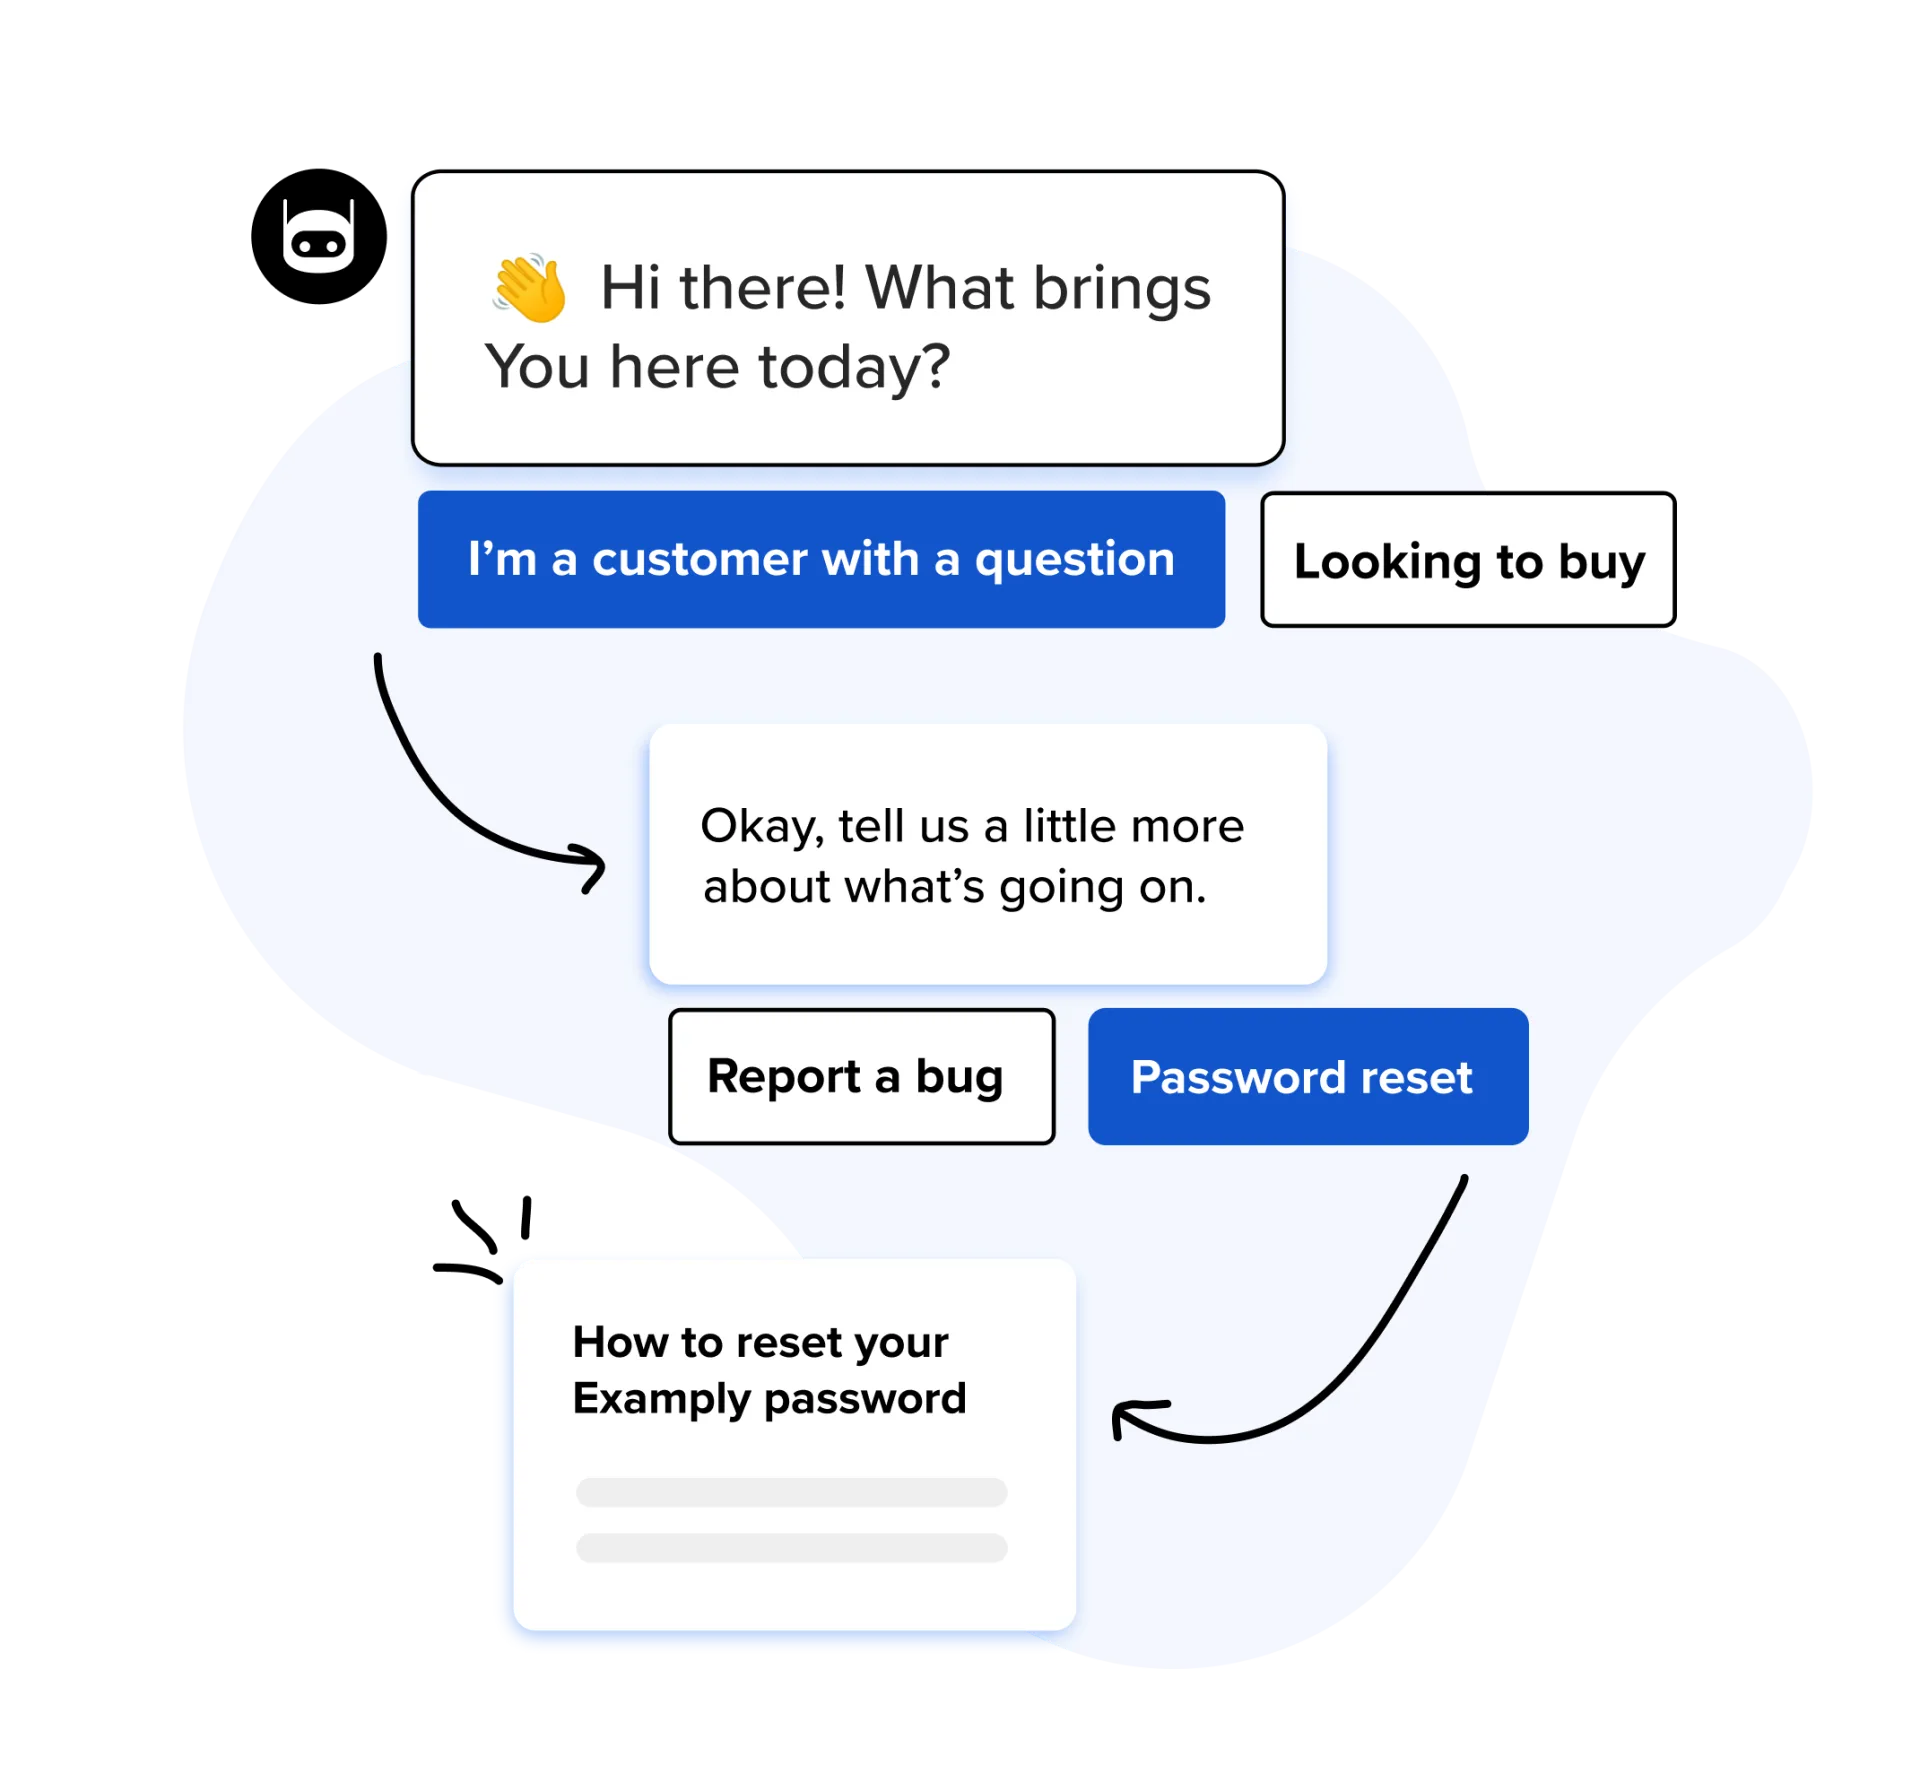 A conversational chatbot helps a customer reset their password in 2 easy steps